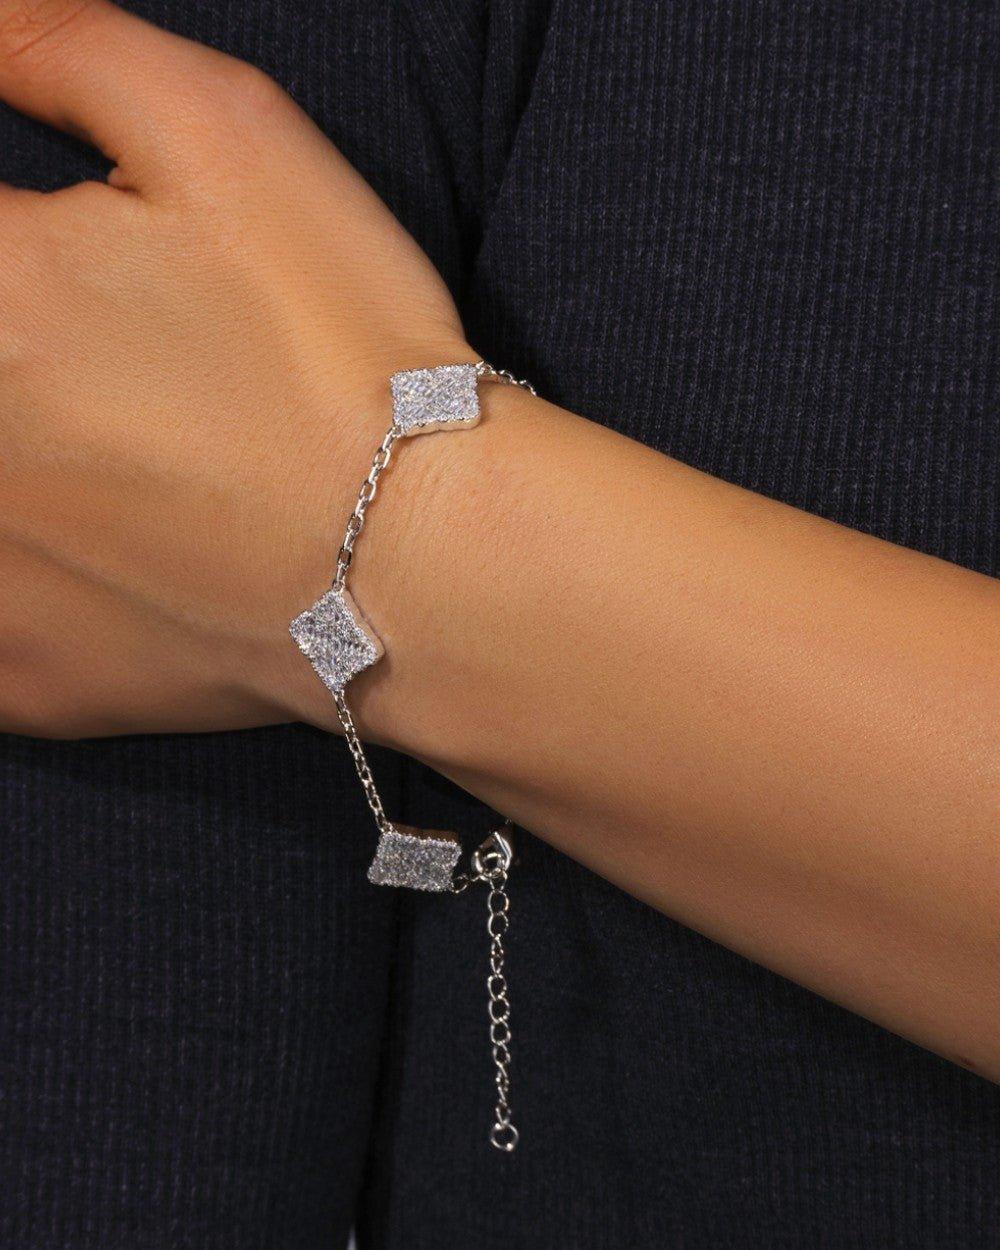 ICED CLOVER BRACELET. - WHITE GOLD - DRIP IN THE JEWEL